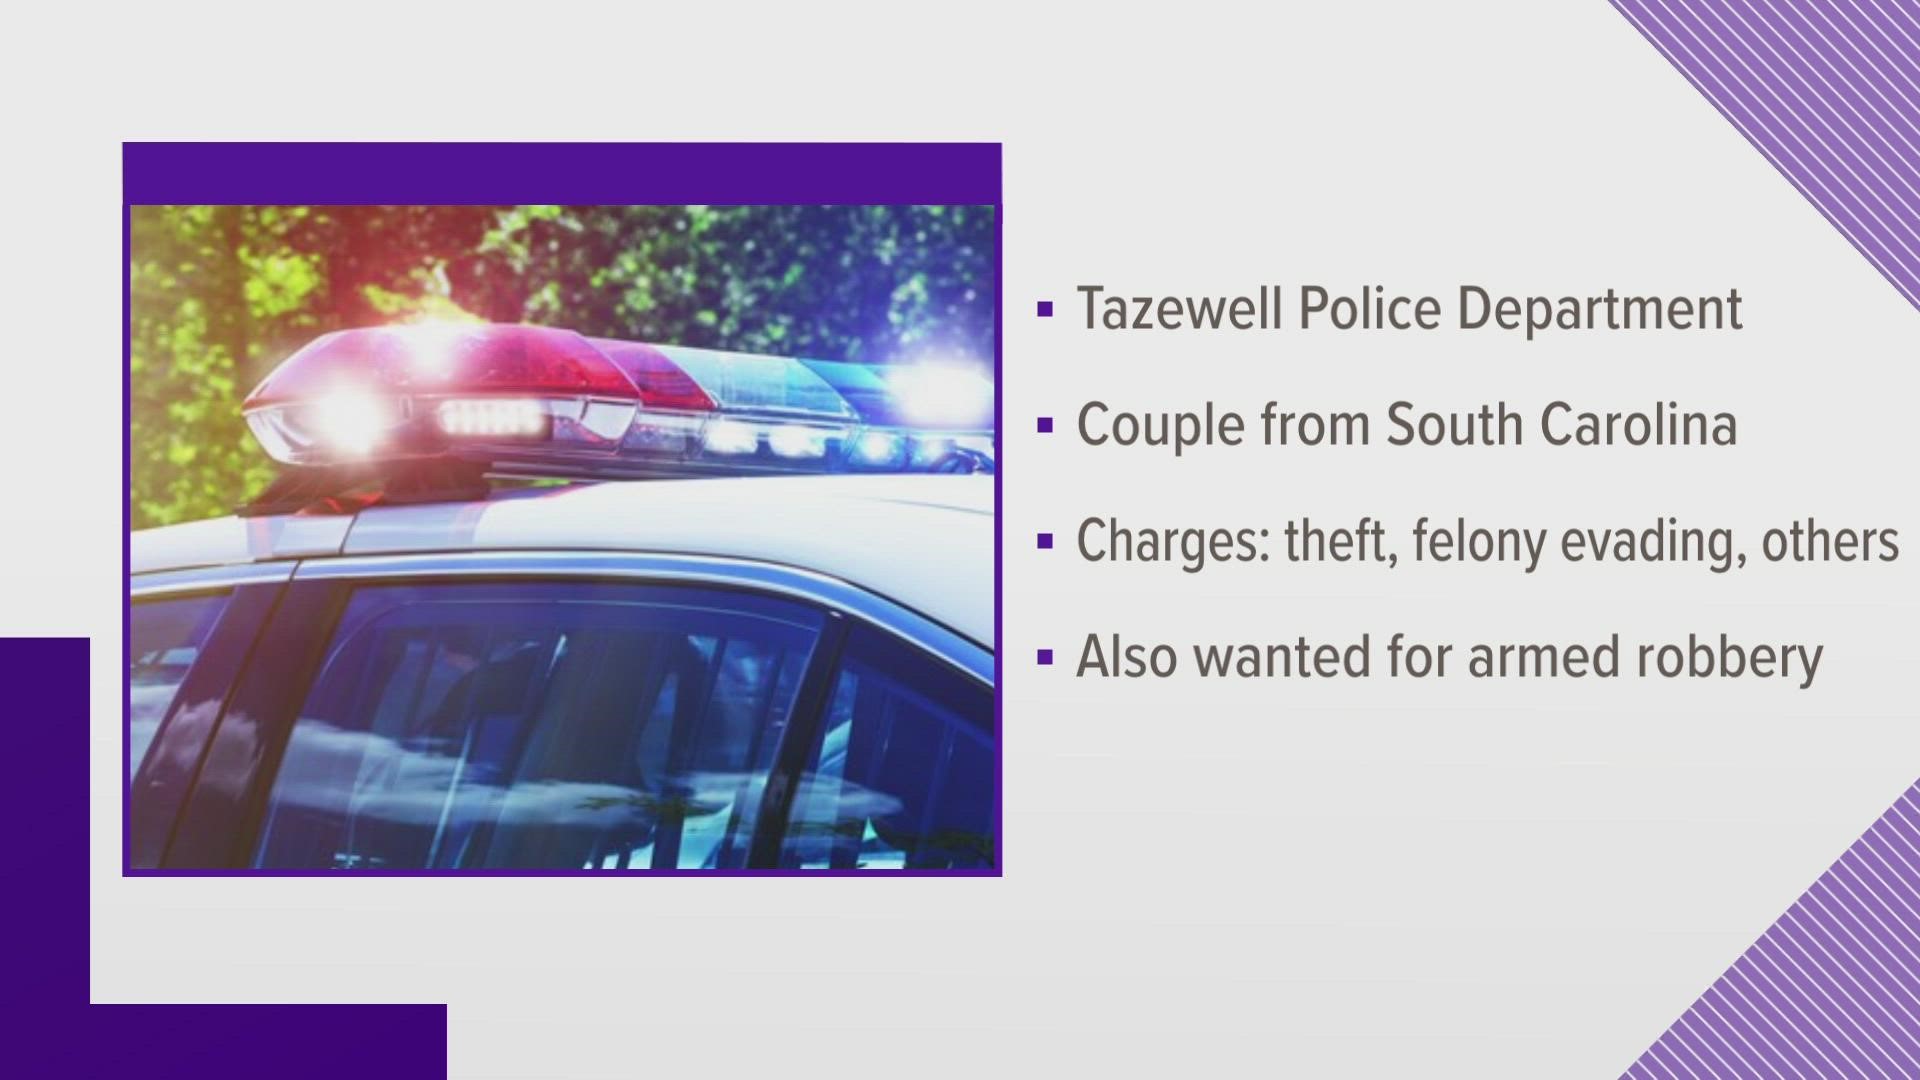 A man and woman face multiple after New Tazewell Police Department say they shoplifted, then fled from police.